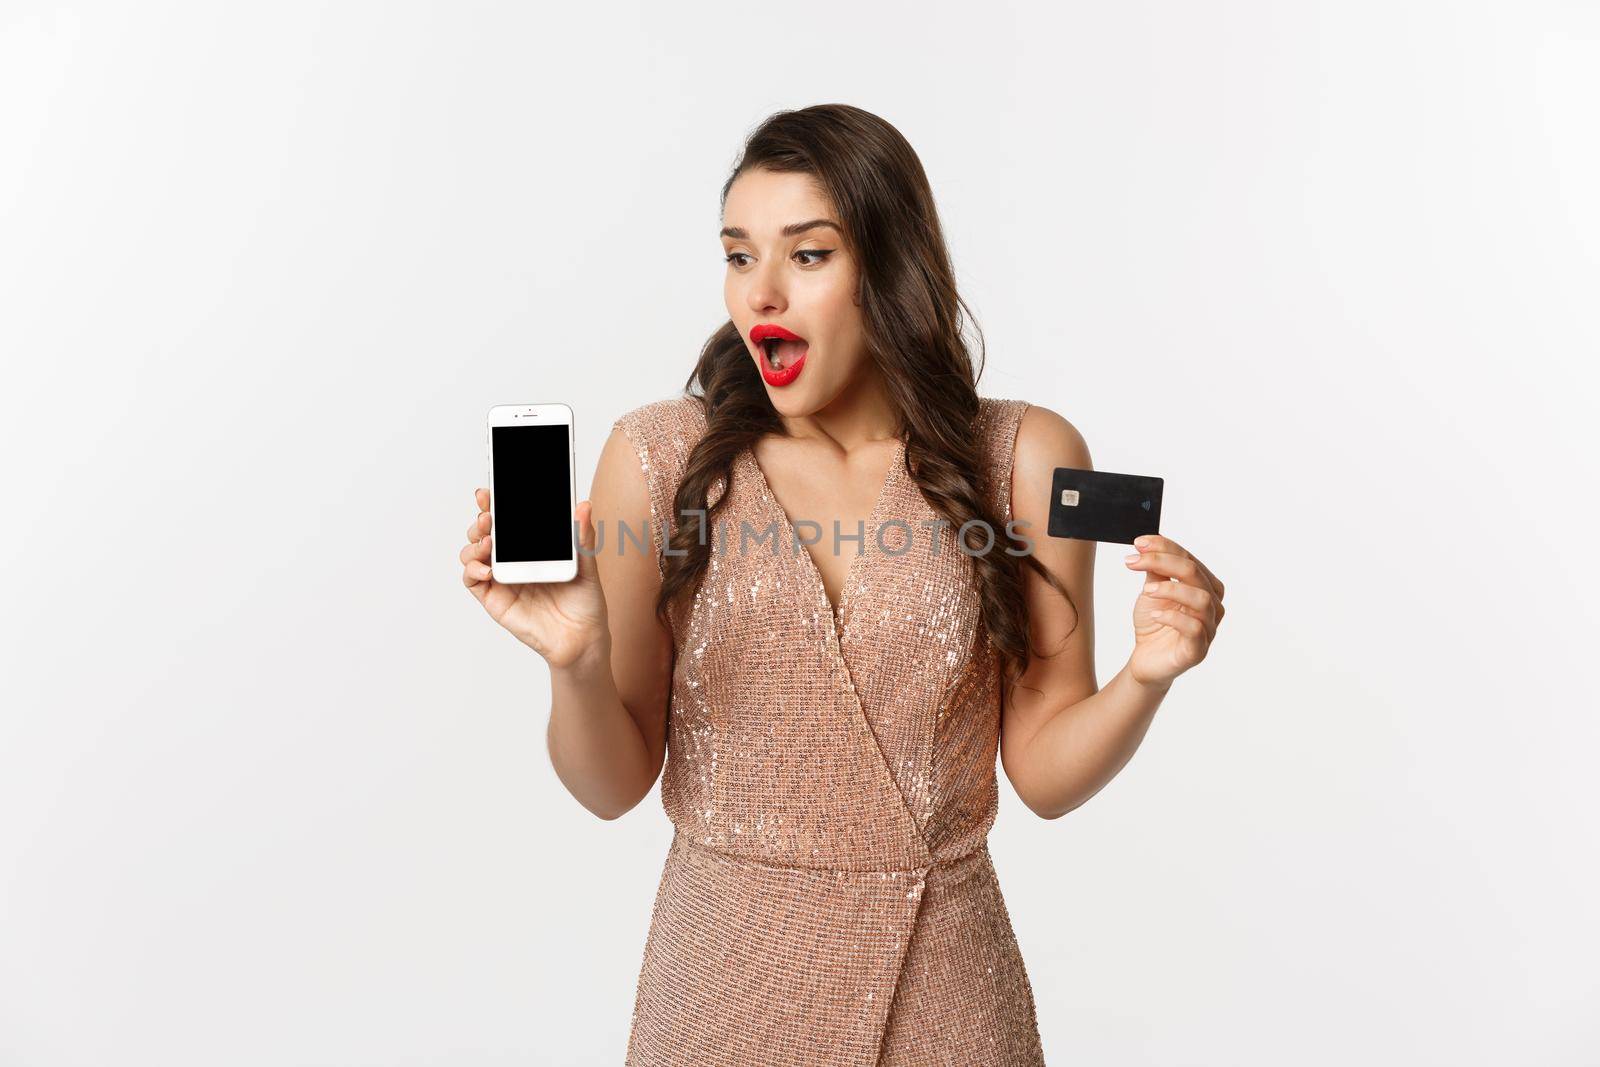 Online shopping and holidays concept. Elegant woman in party dress looking amazed at phone screen, showing internet store and credit card, white background.